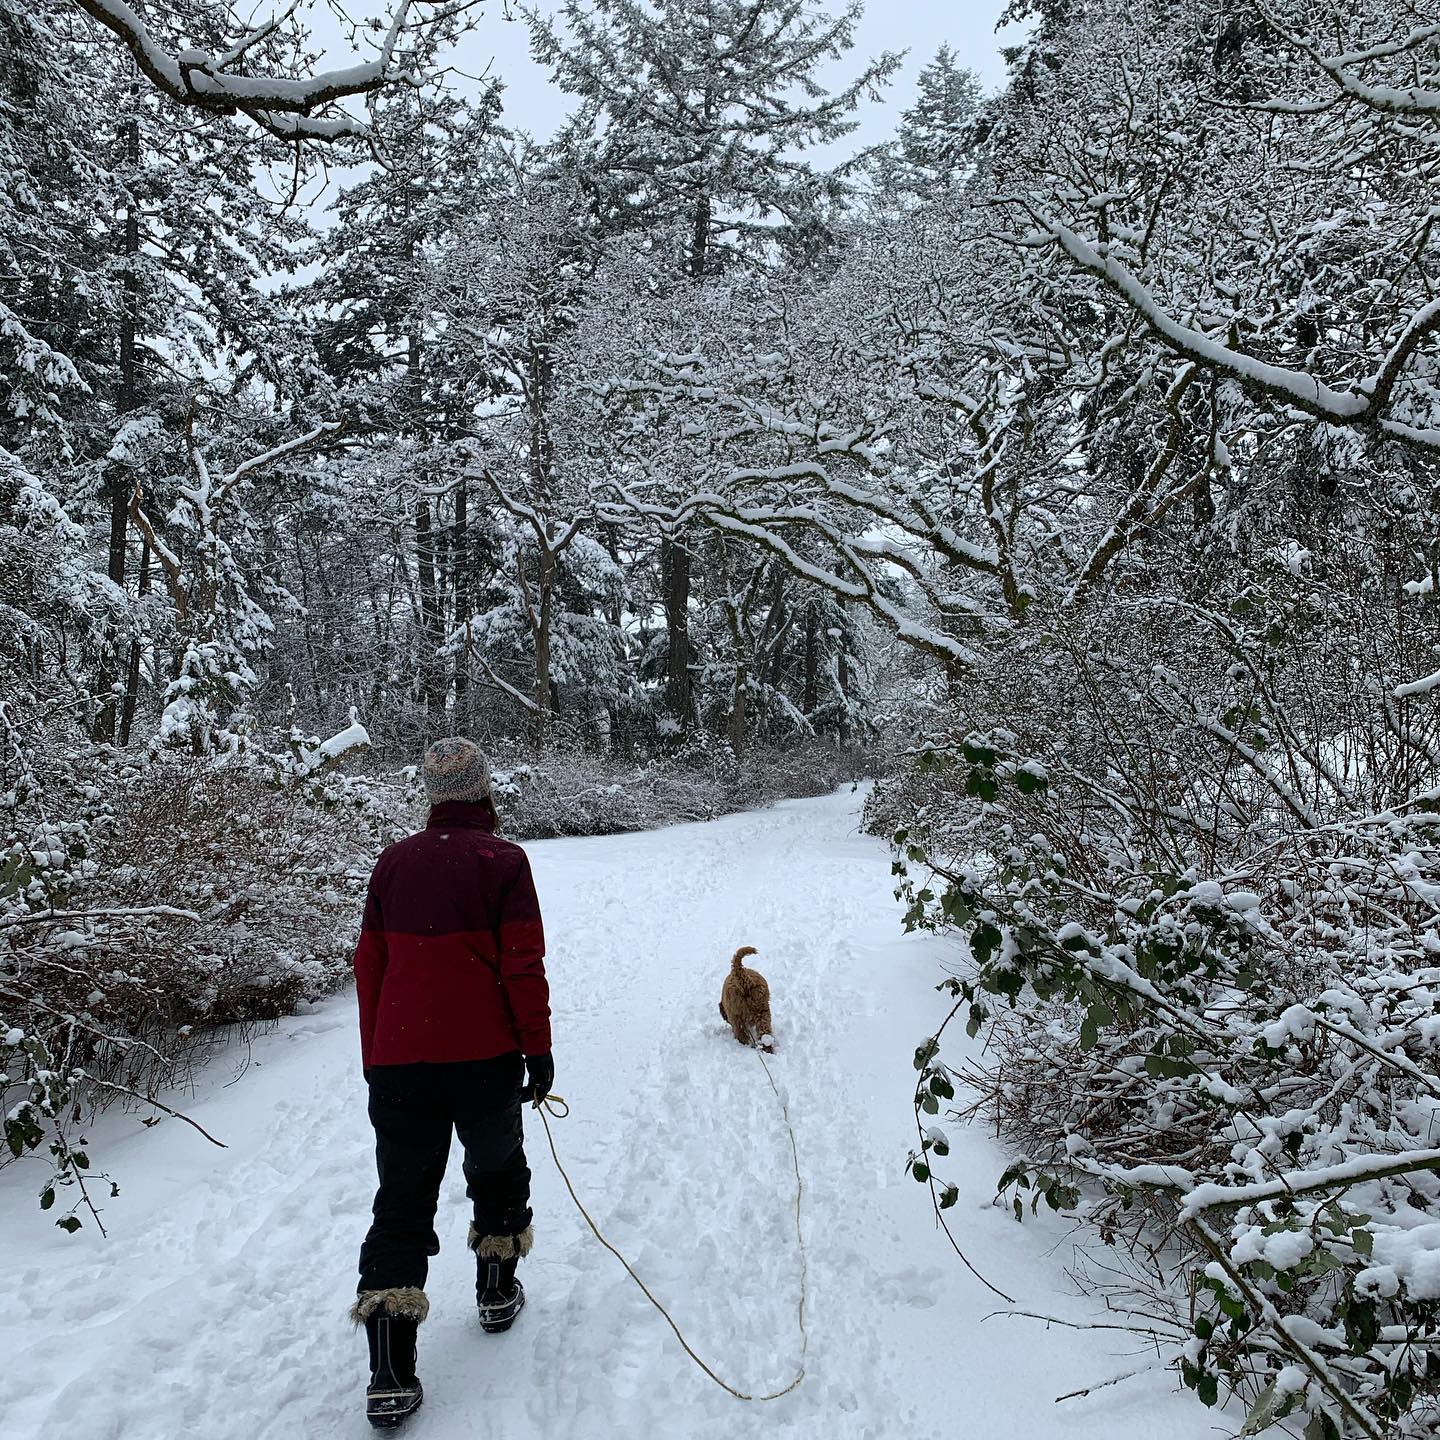 Snowy walk with @therealsox and @rusty.the.dog.yyj  We don’t get much snow here, so we generally try to make the most of it. #dogwalk #esquimalt #snowday #snow